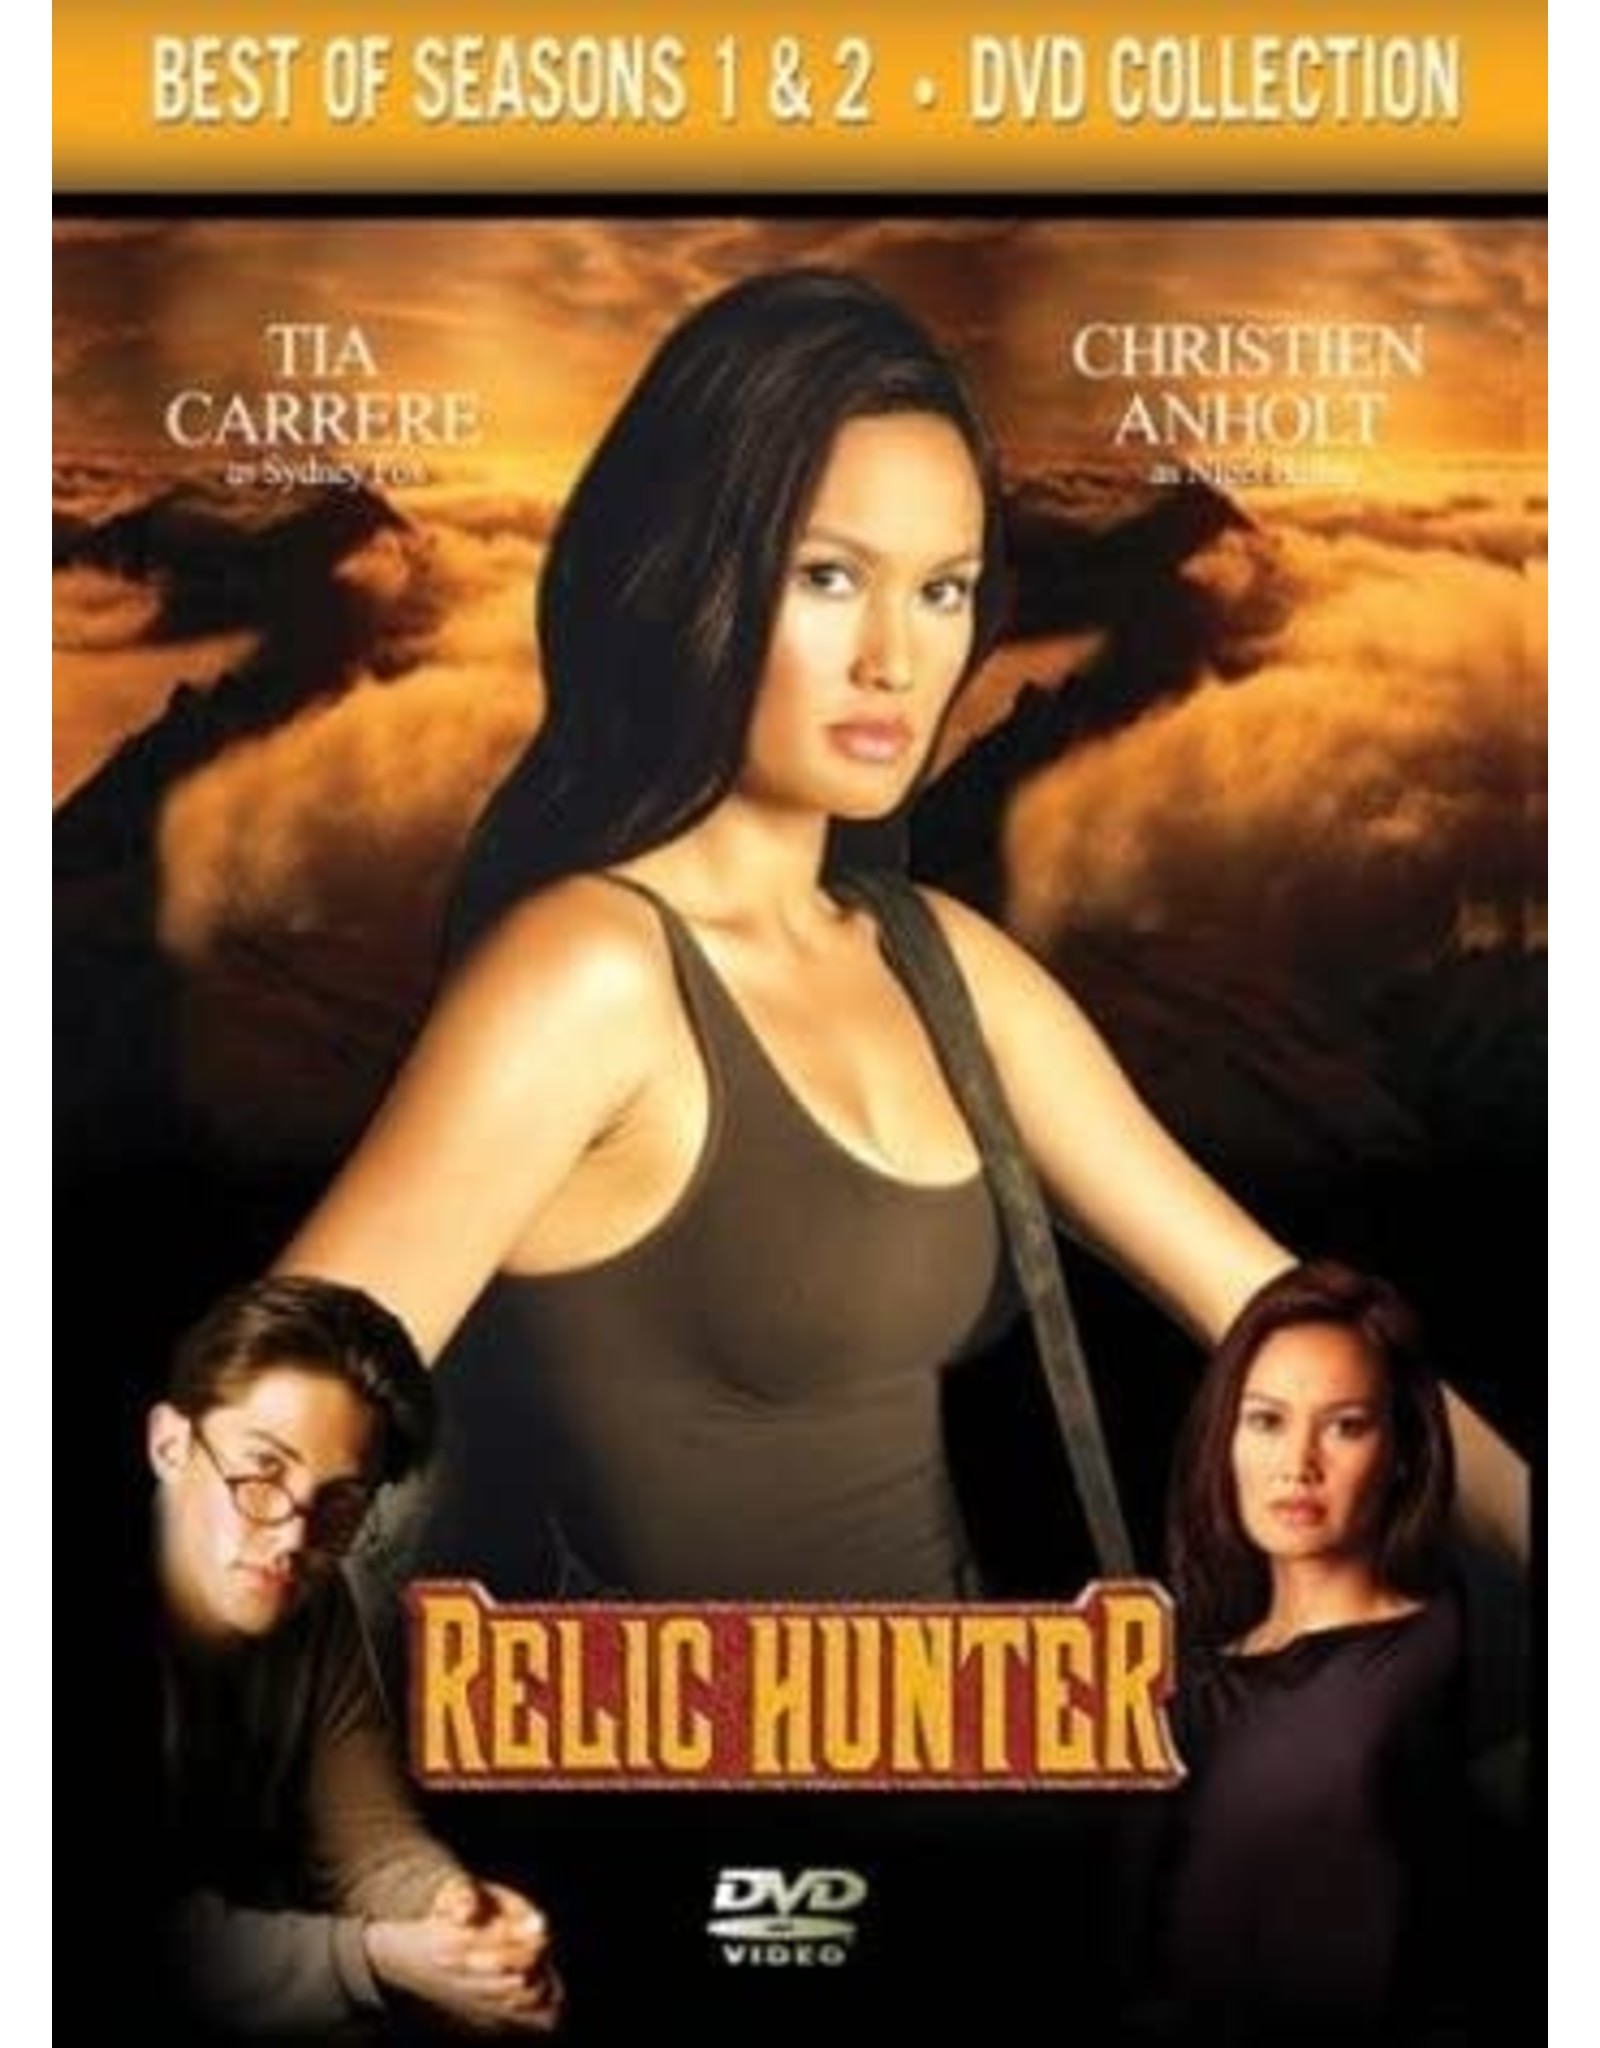 Cult & Cool Relic Hunter The Best of Seasons 1 & 2